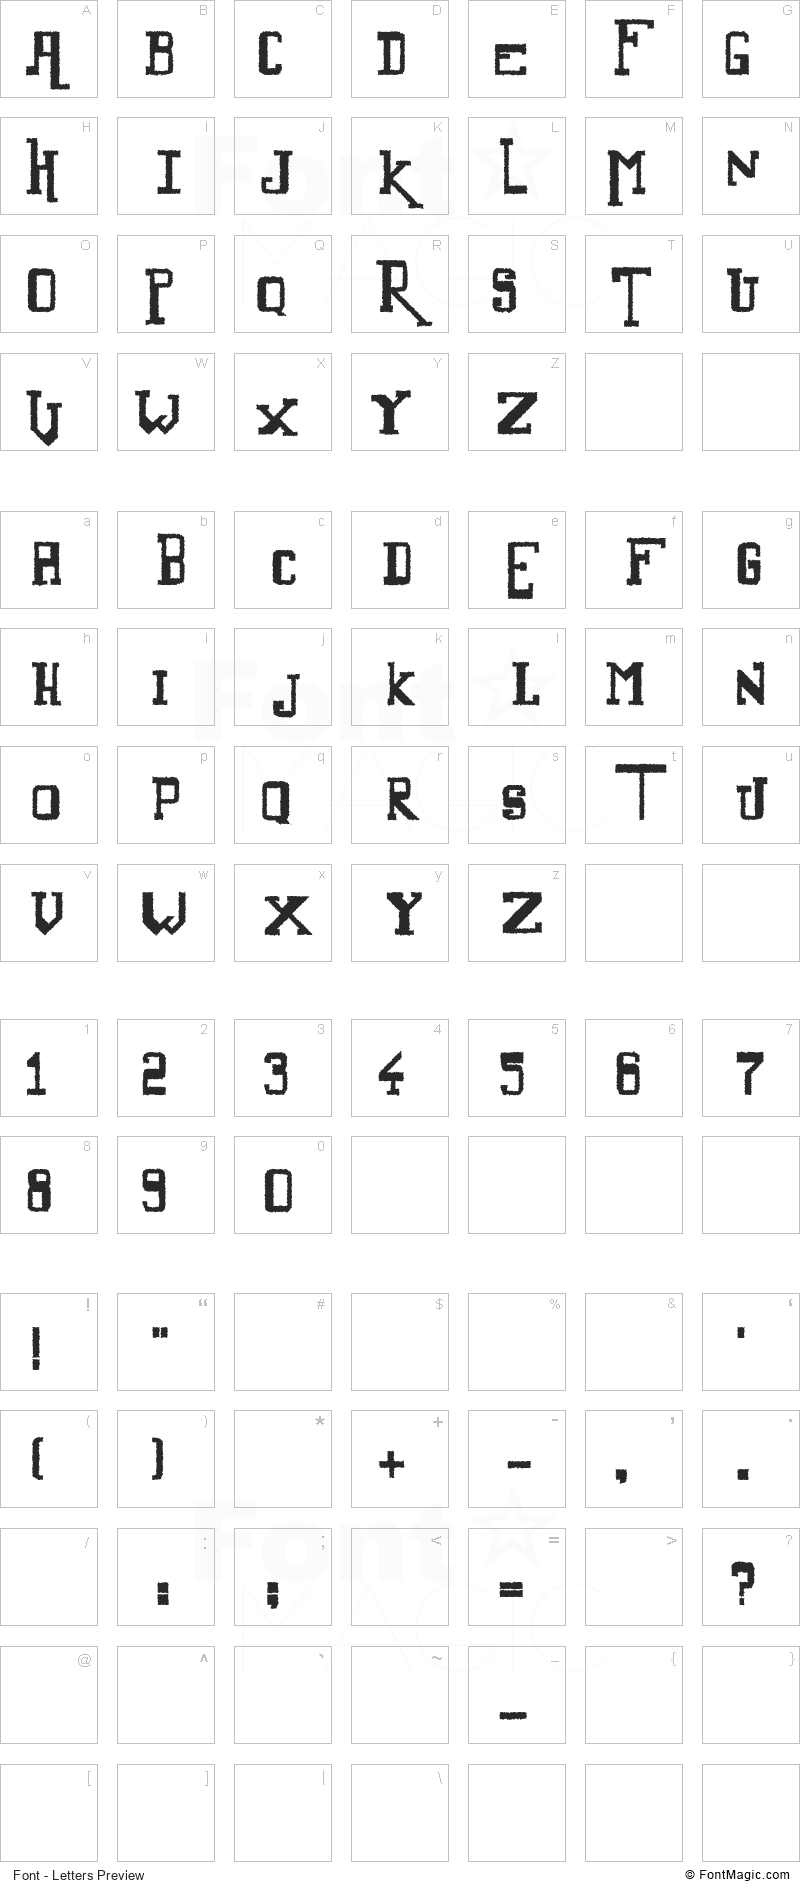 Alternate Font - All Latters Preview Chart